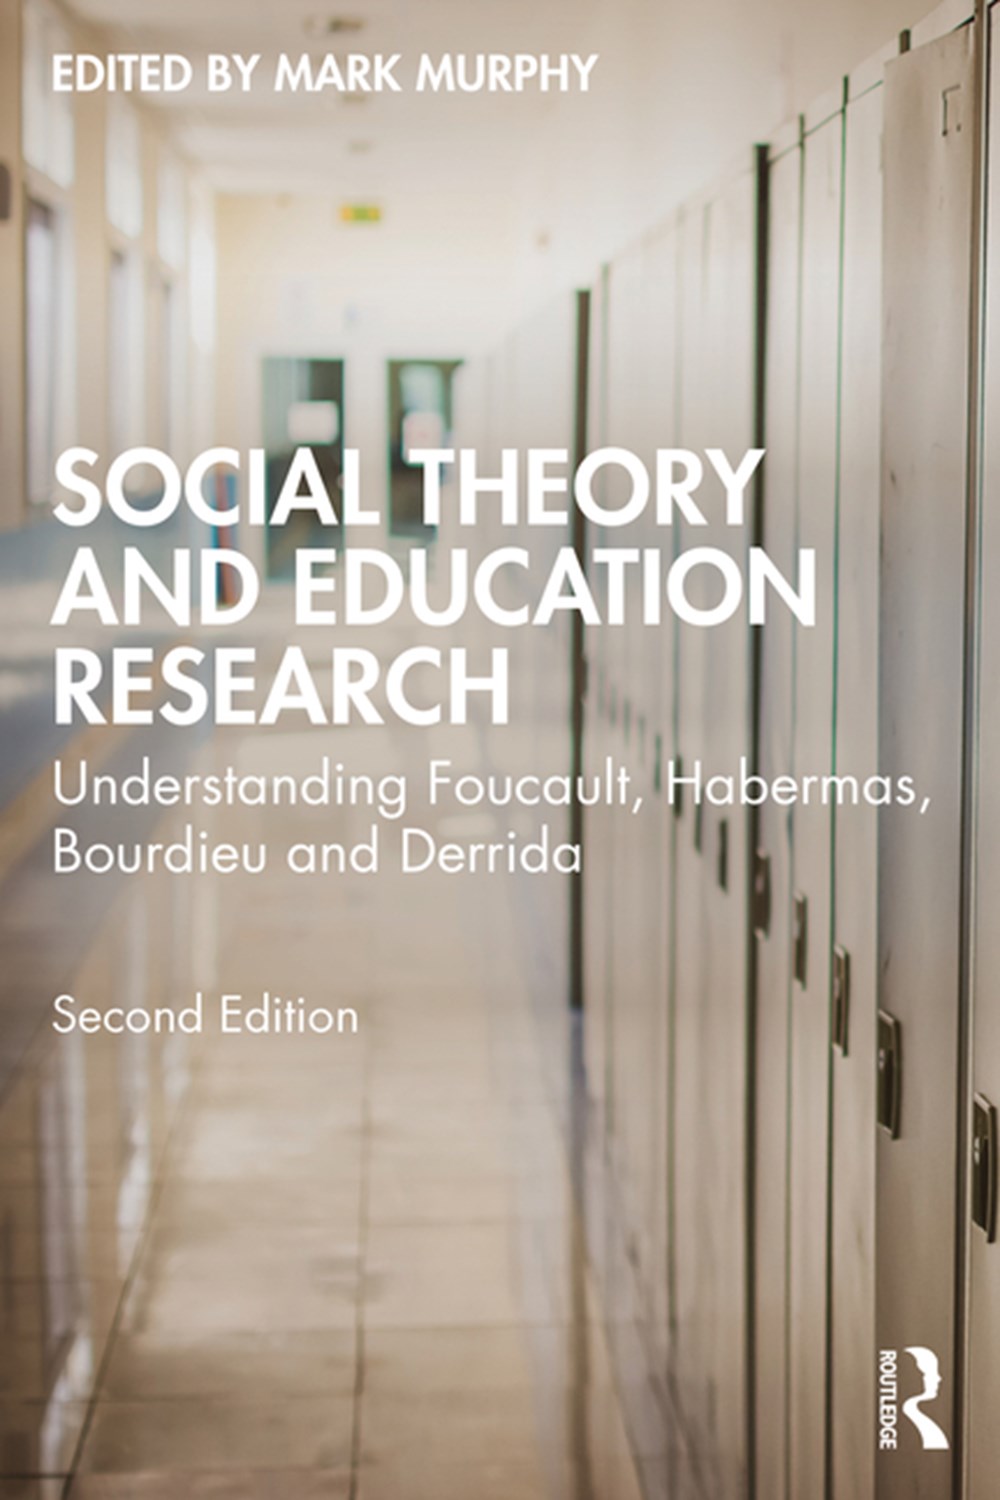 Social Theory and Education Research Understanding Foucault, Habermas, Bourdieu and Derrida